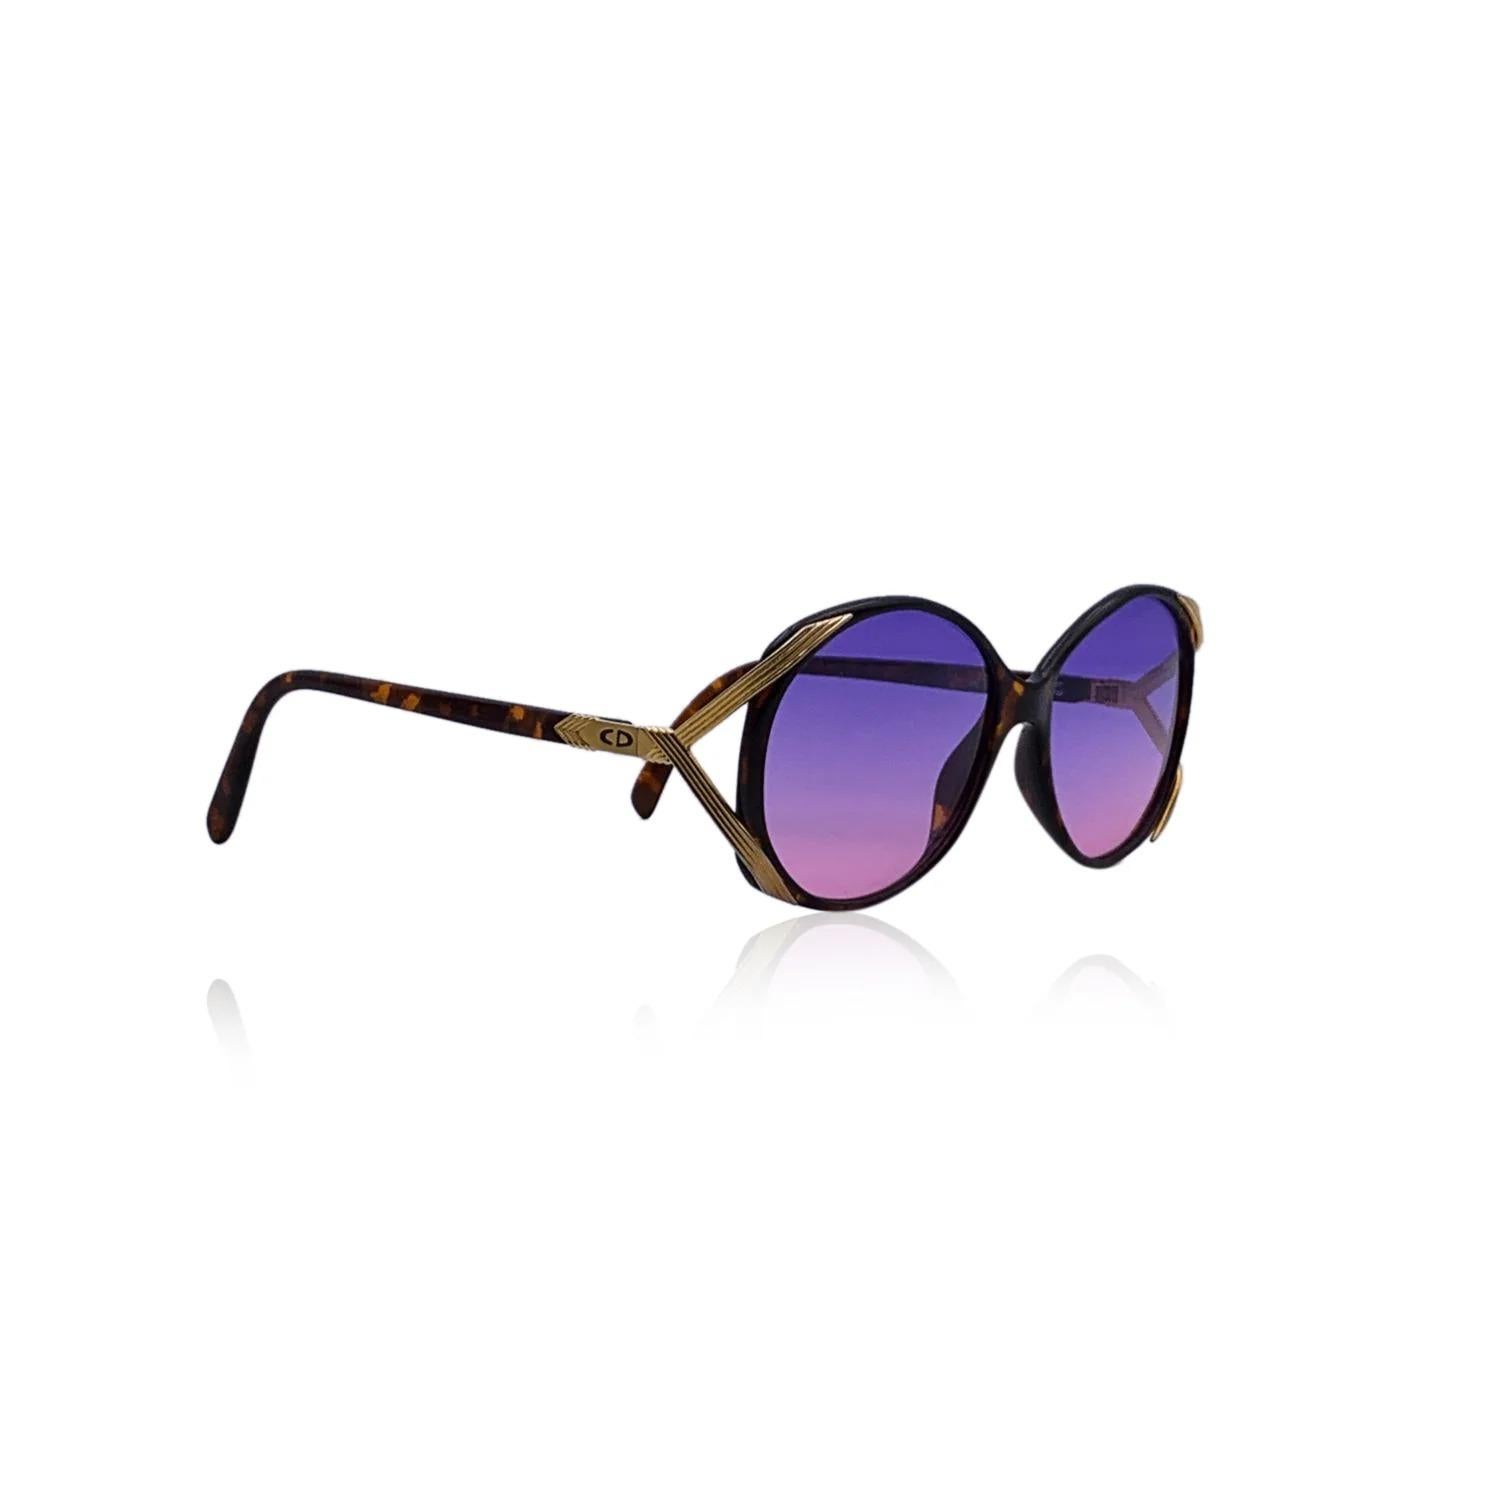 CHRISTIAN DIOR Vintage 1980s oval brown tortoise acetate sunglasses with gold metal accents on the sides. Purple gradient lenses. Black acetate arms. Handmade in Germany. CD logo on temples. Mod. & Refs: 2428 - 10 - 56/16. Details MATERIAL: Acetate